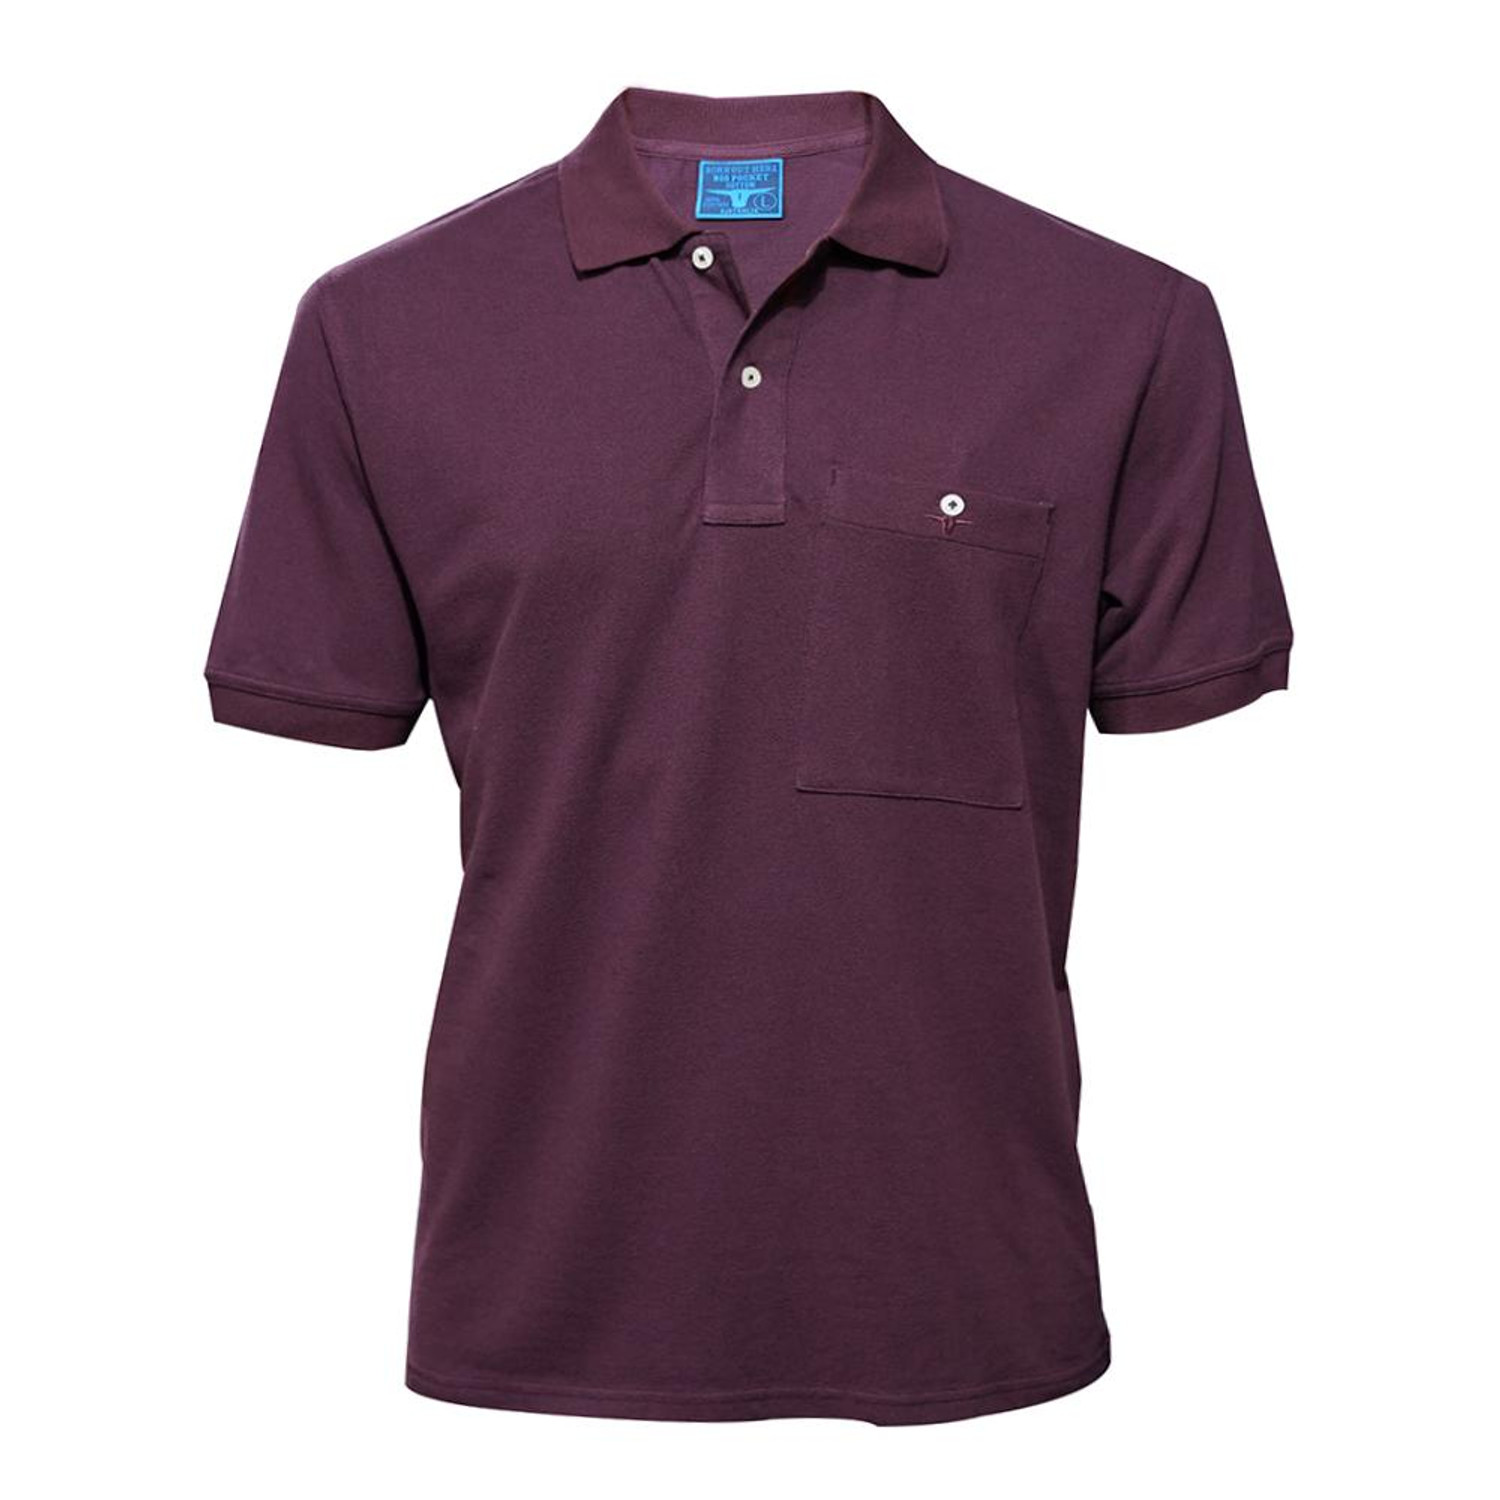 Born Out Here BMP8001 Mens Short Sleeve 100% Cotton Polo Shirt in BURGUNDY